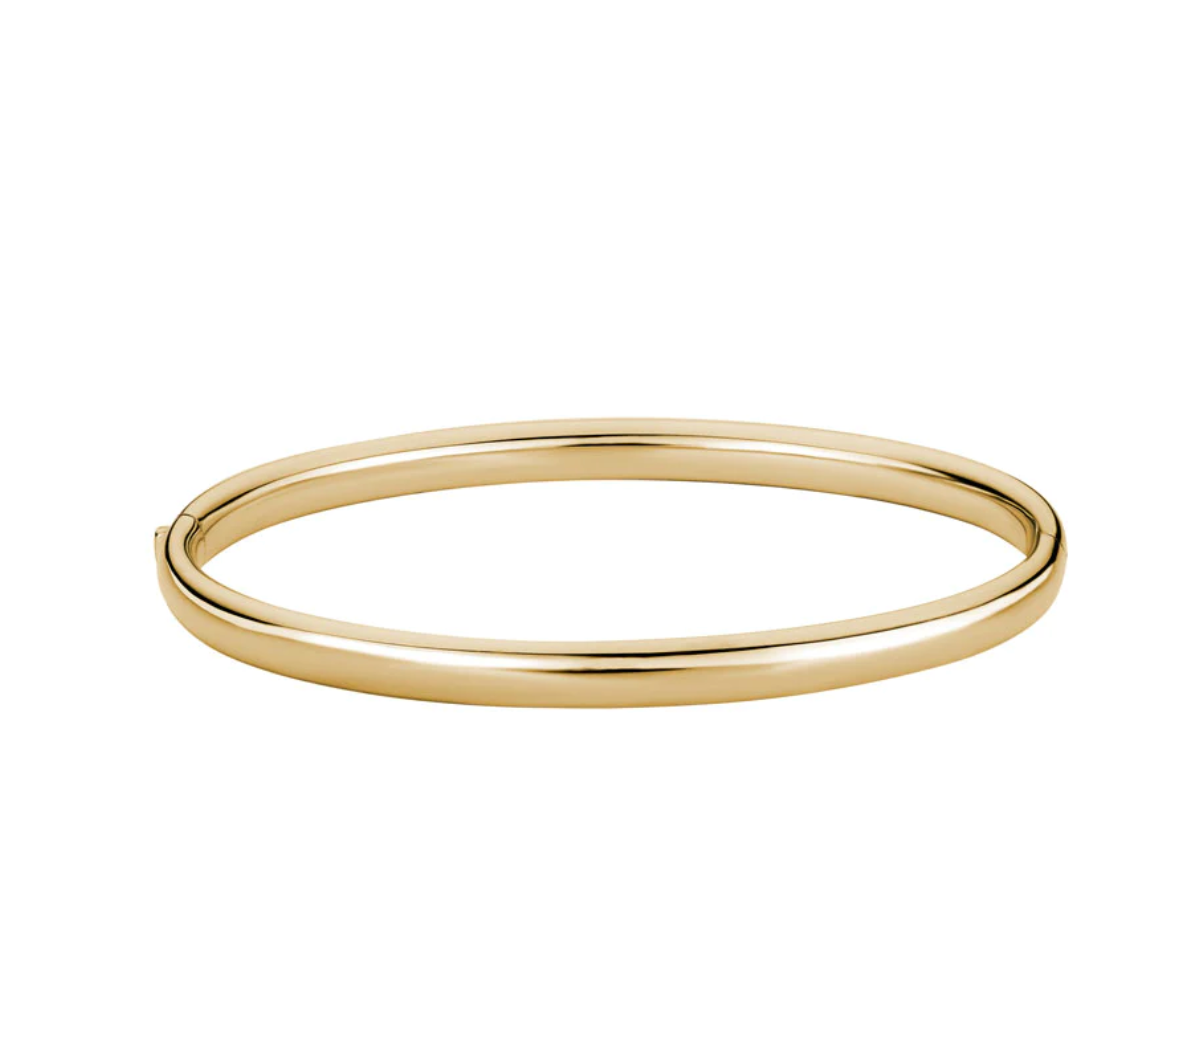 Stackable Rounded Hinged Bangle in 14k Yellow Gold - 5mm width